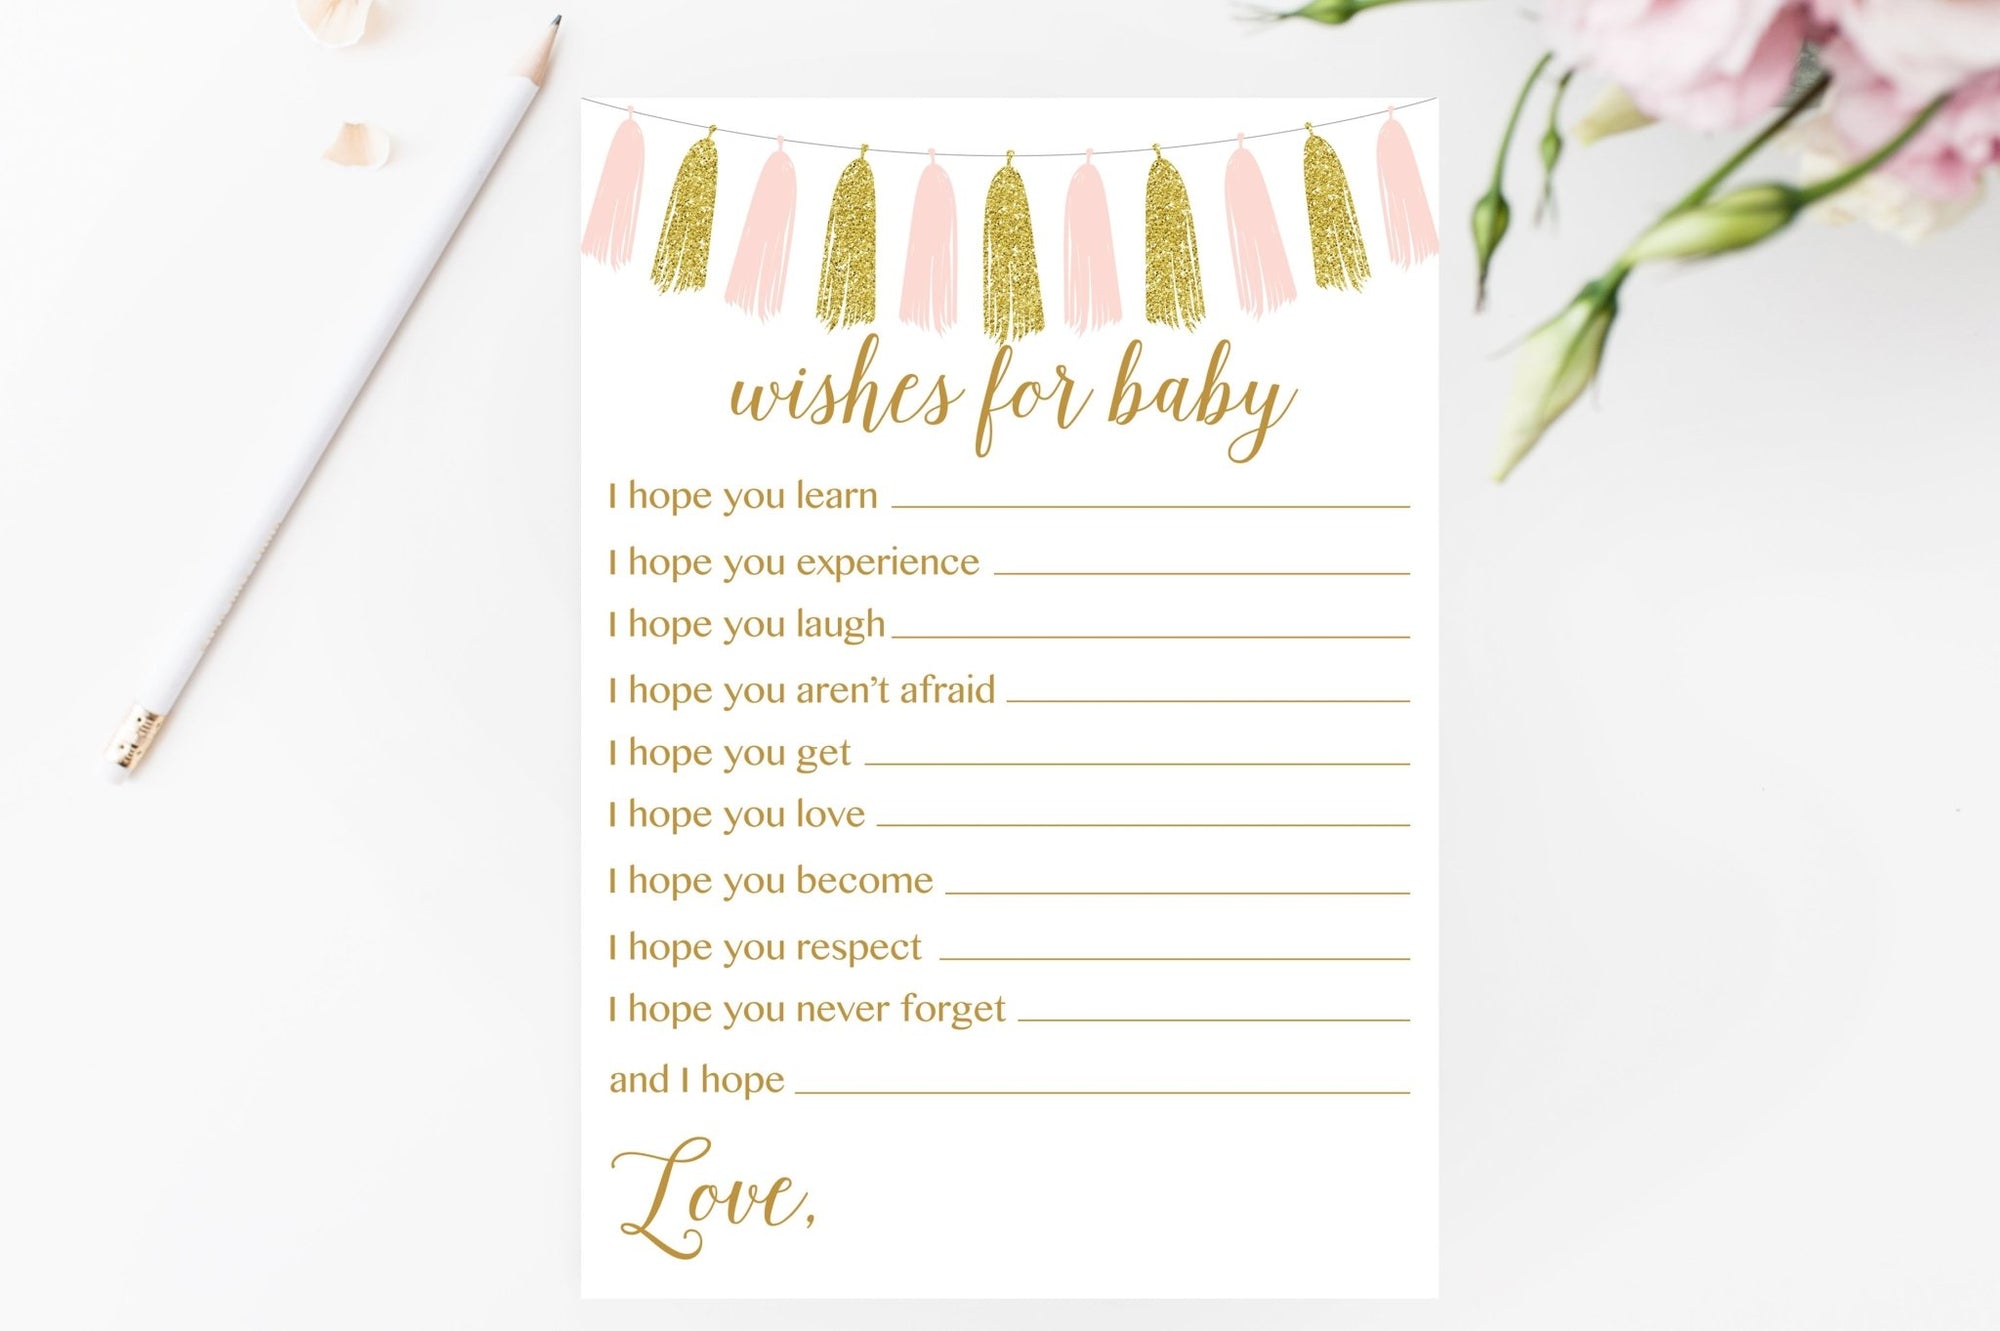 Wishes for Baby - Pink & Gold Tassel Printable - Pretty Collected